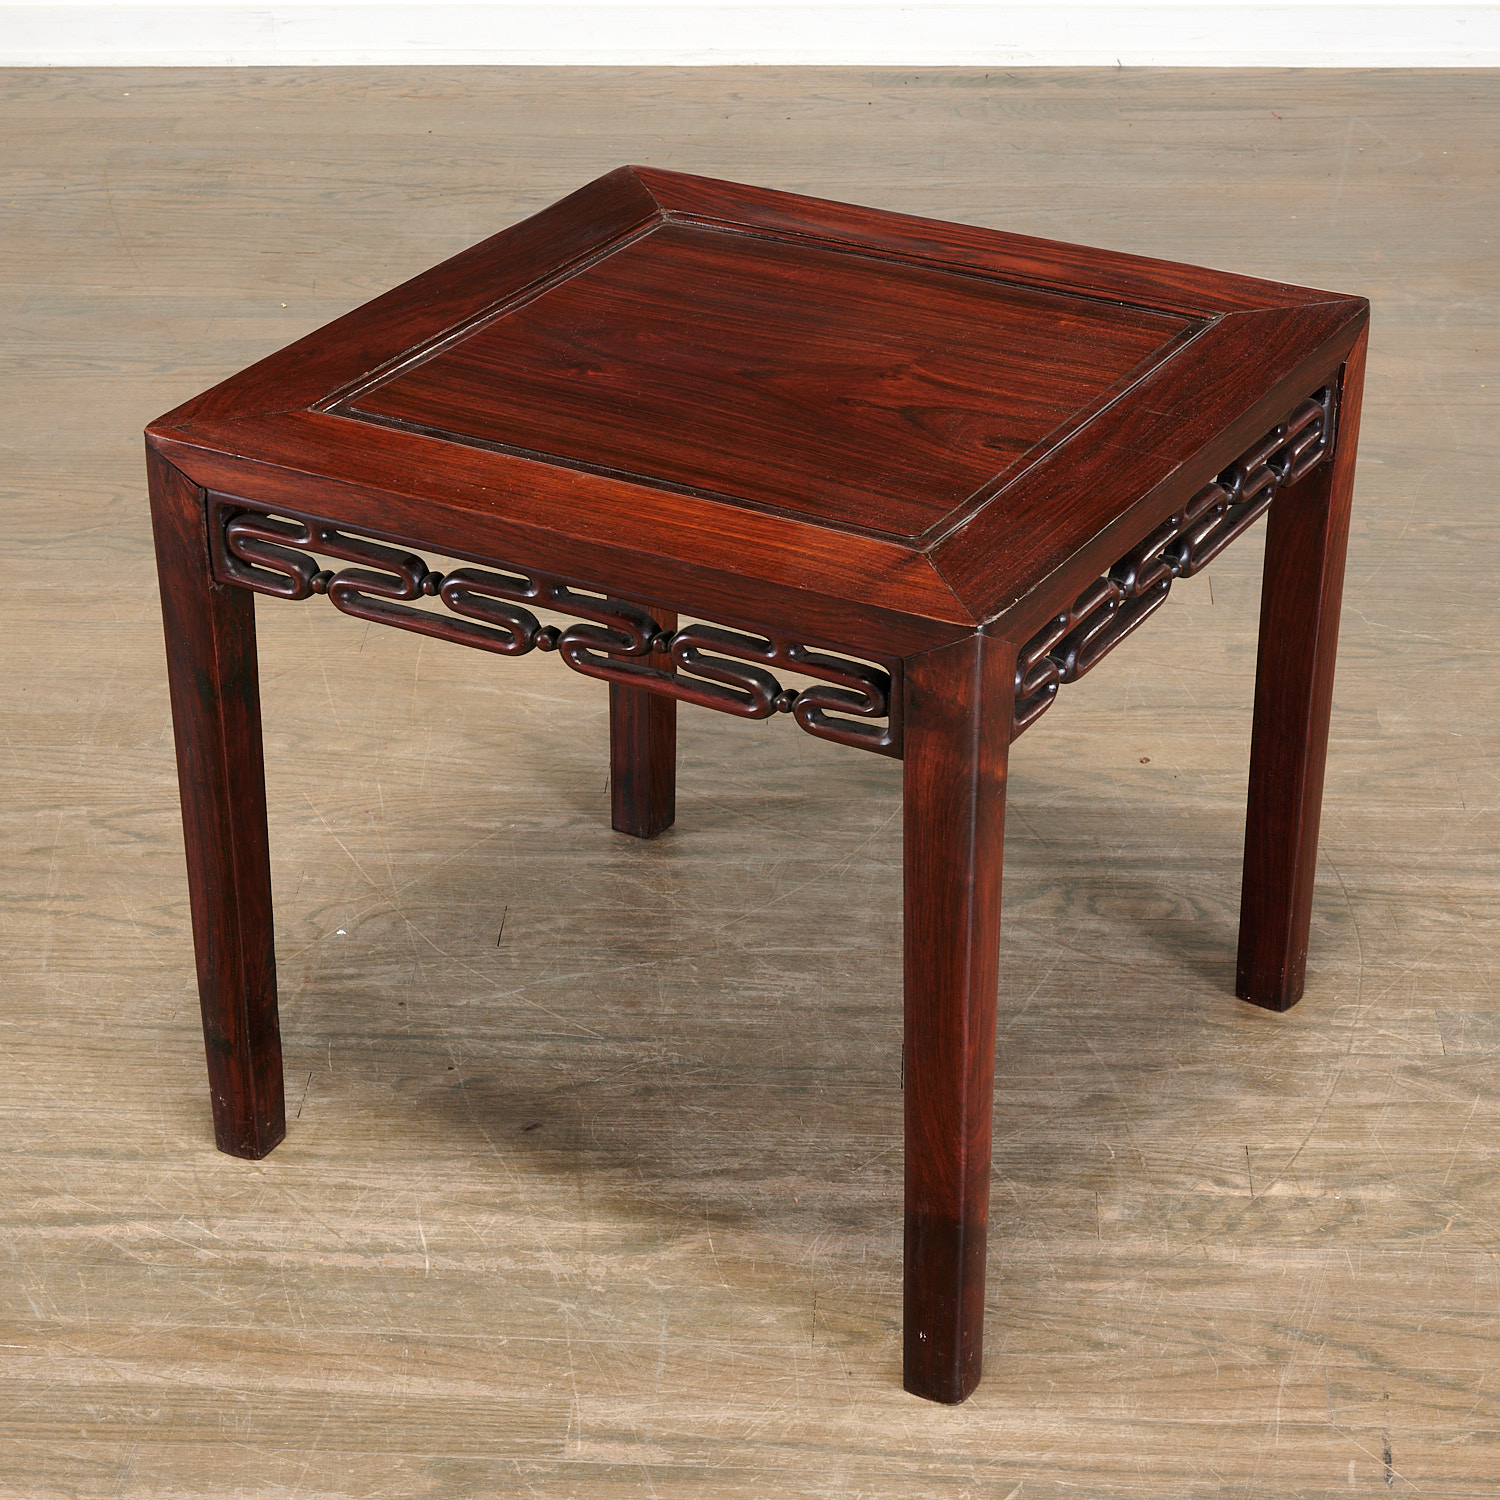 CHINESE CARVED HARDWOOD TABLE Qing 2ce7e4